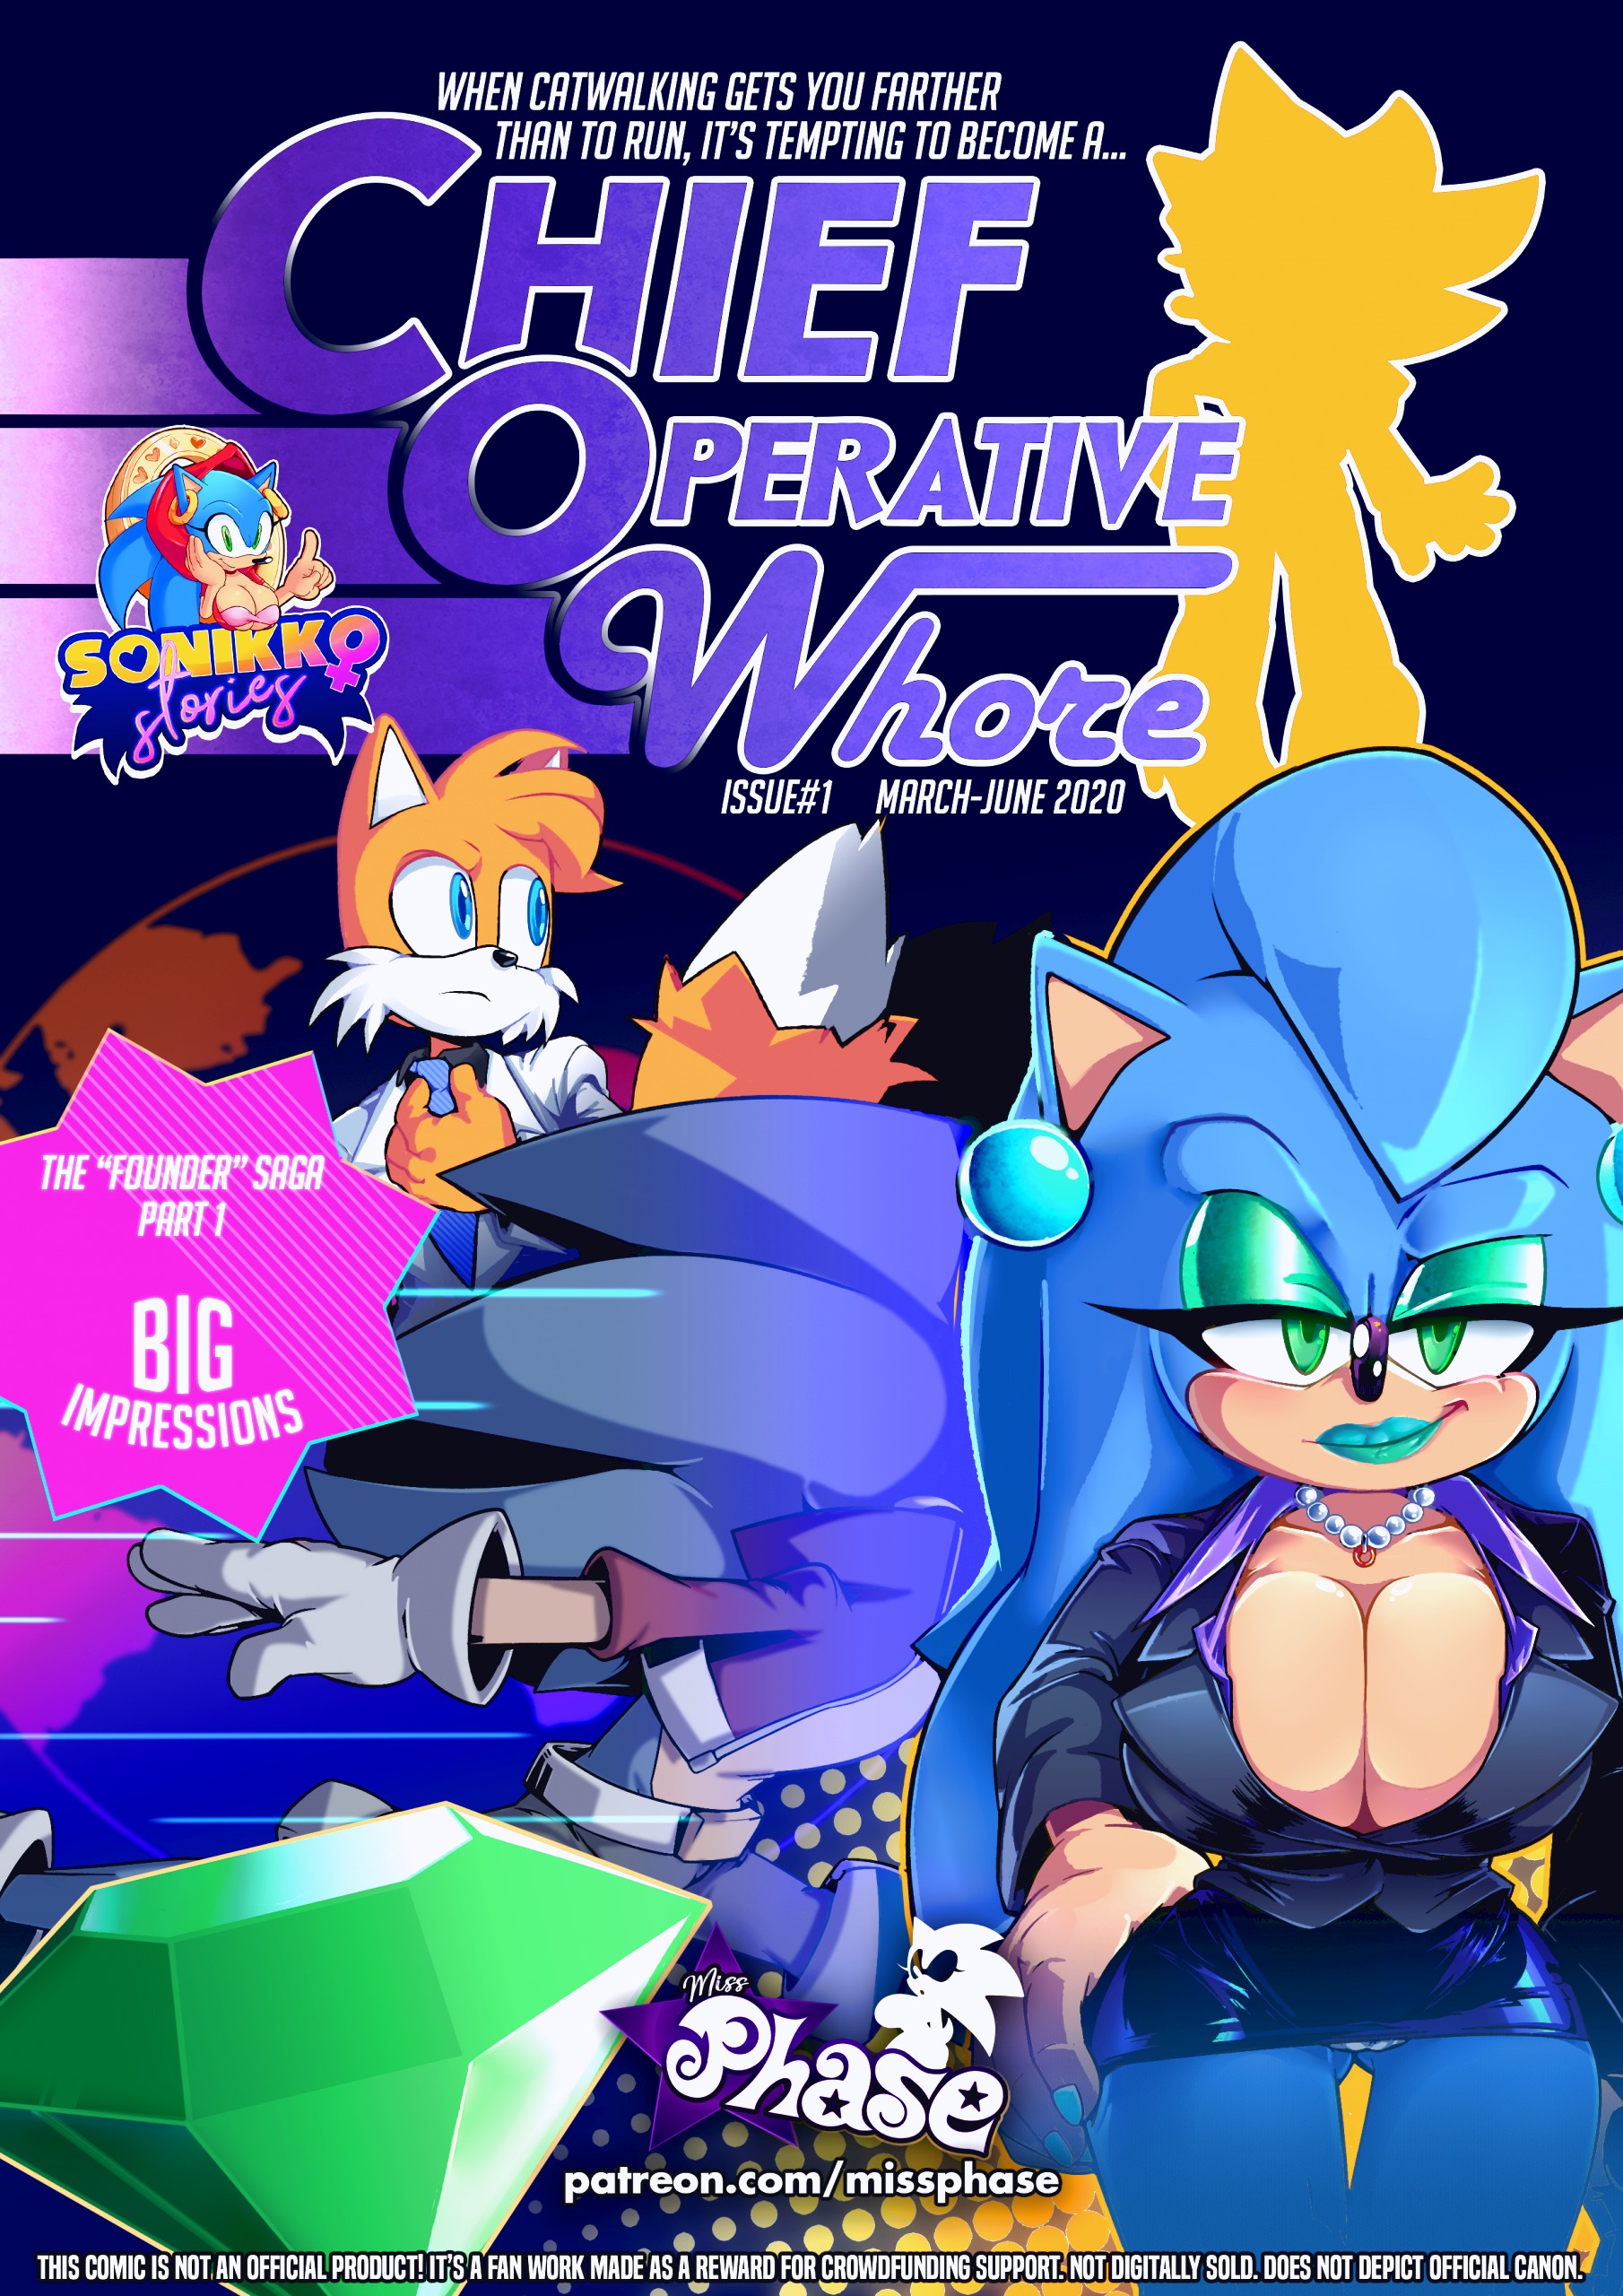 Chief Operative Whore porn comic page 01 on category Sonic The Hedgehog